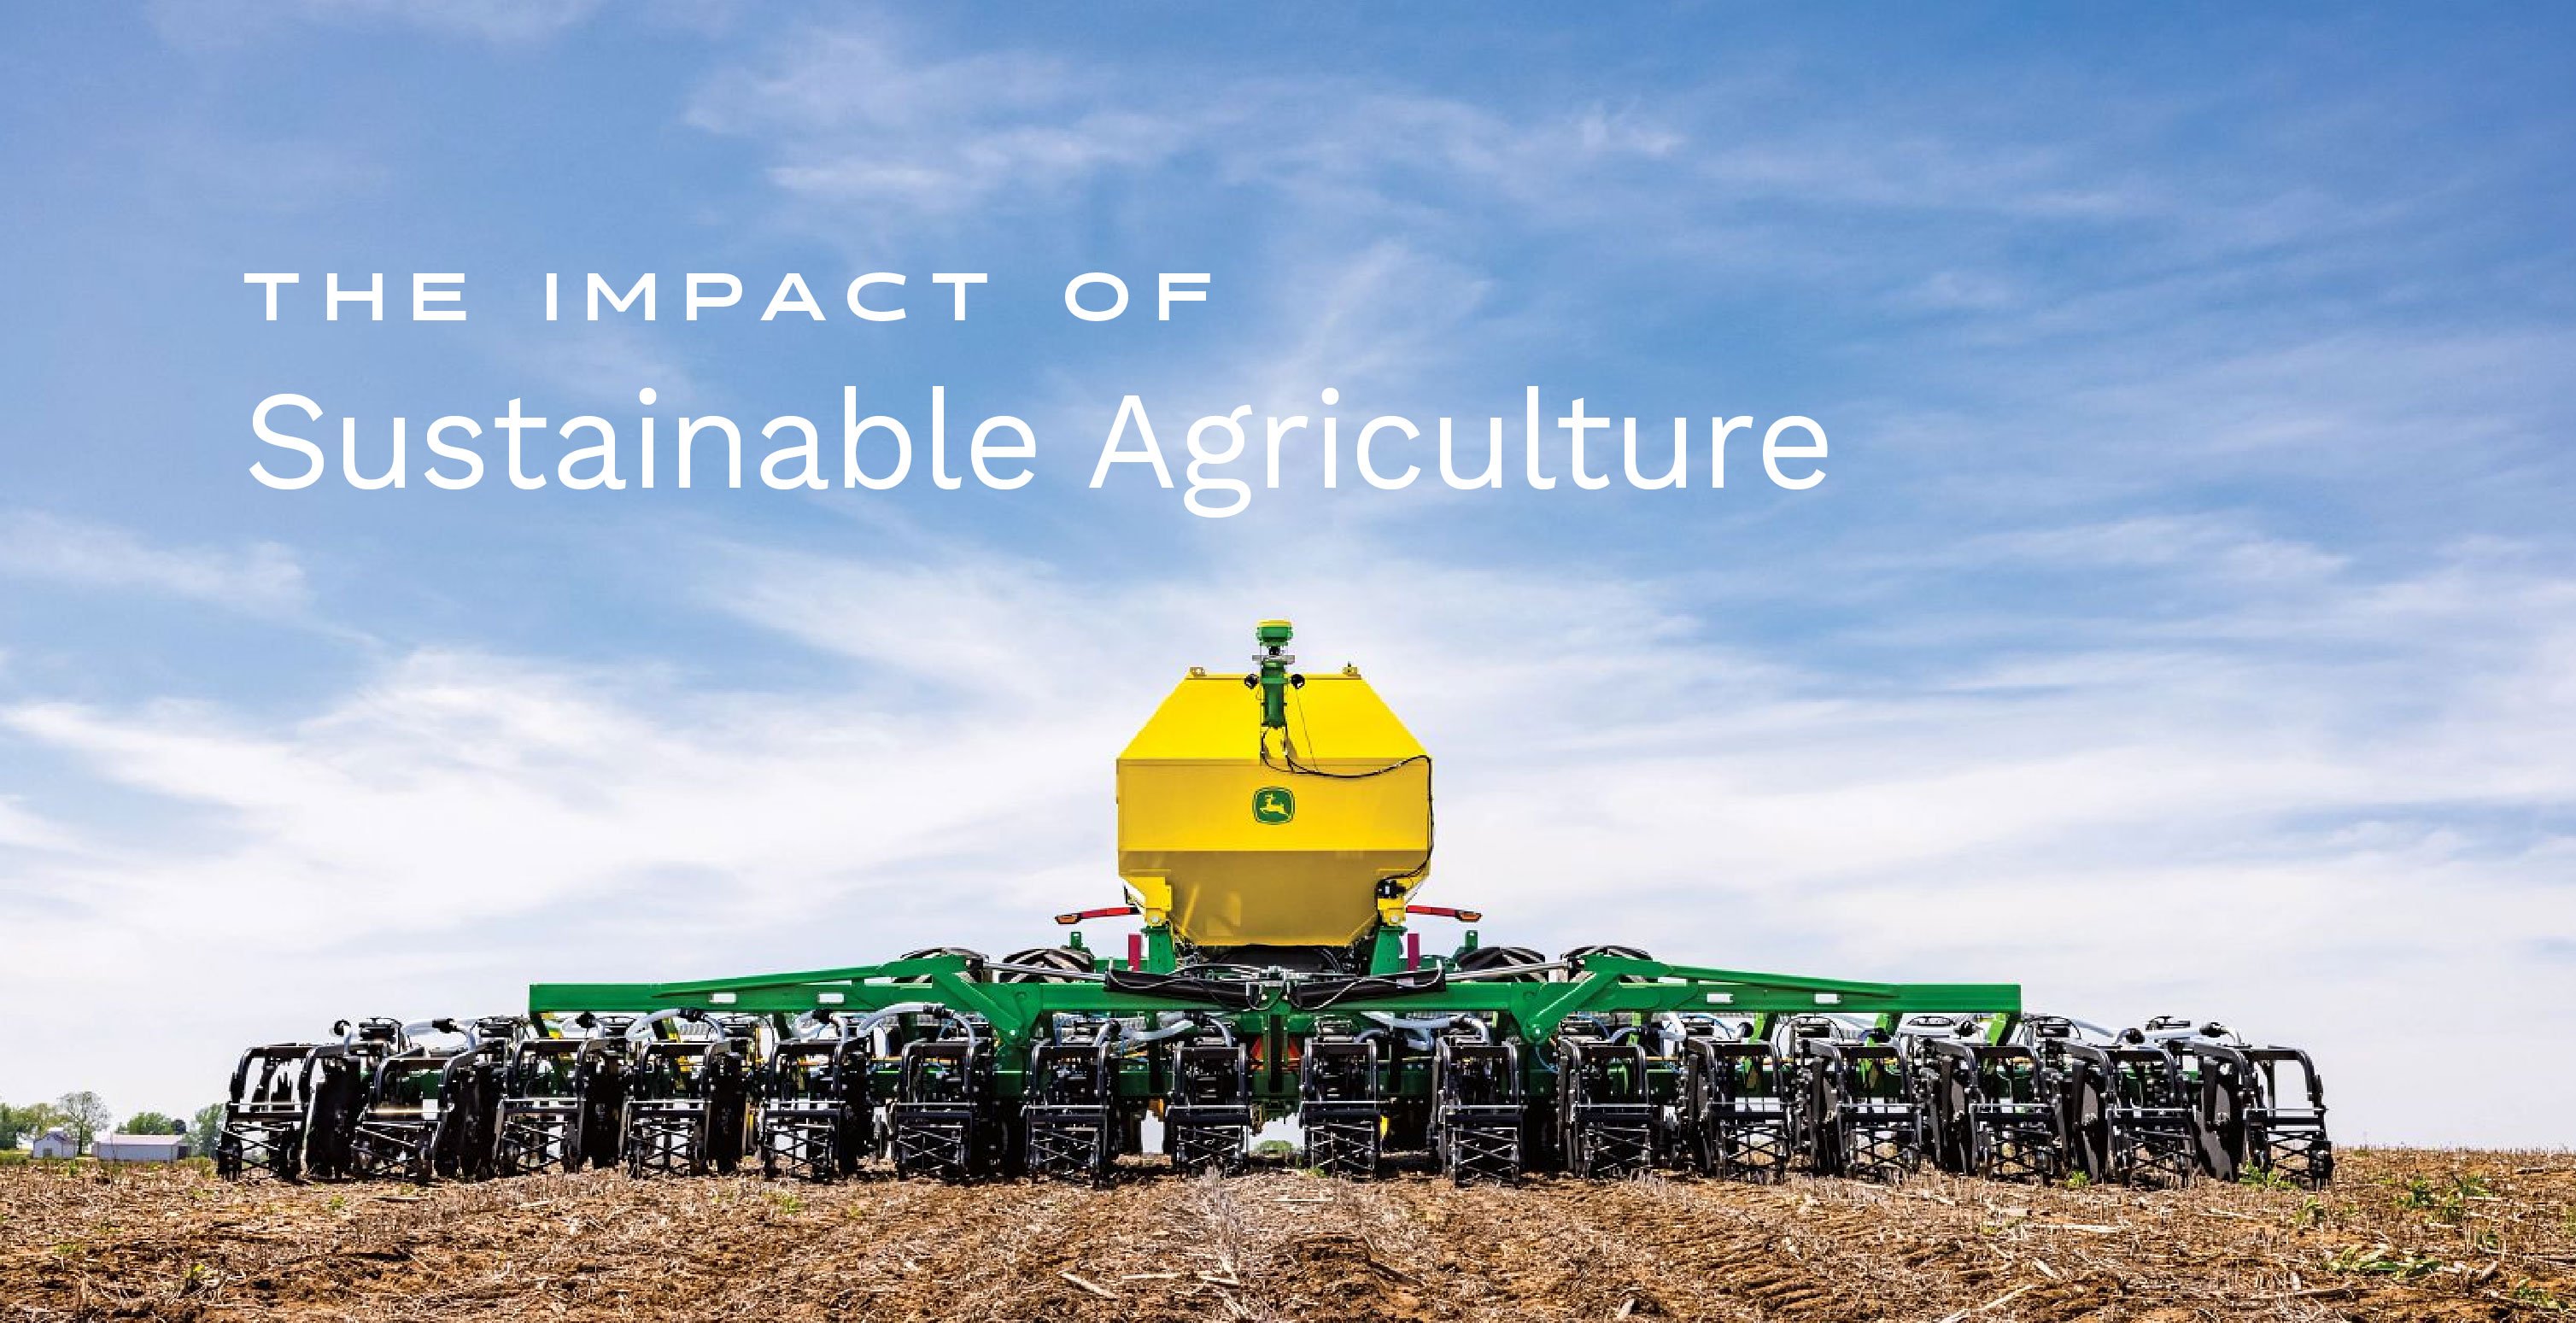 john deere spider in a field with blue sky and text that says the impact of sustainable agriculture